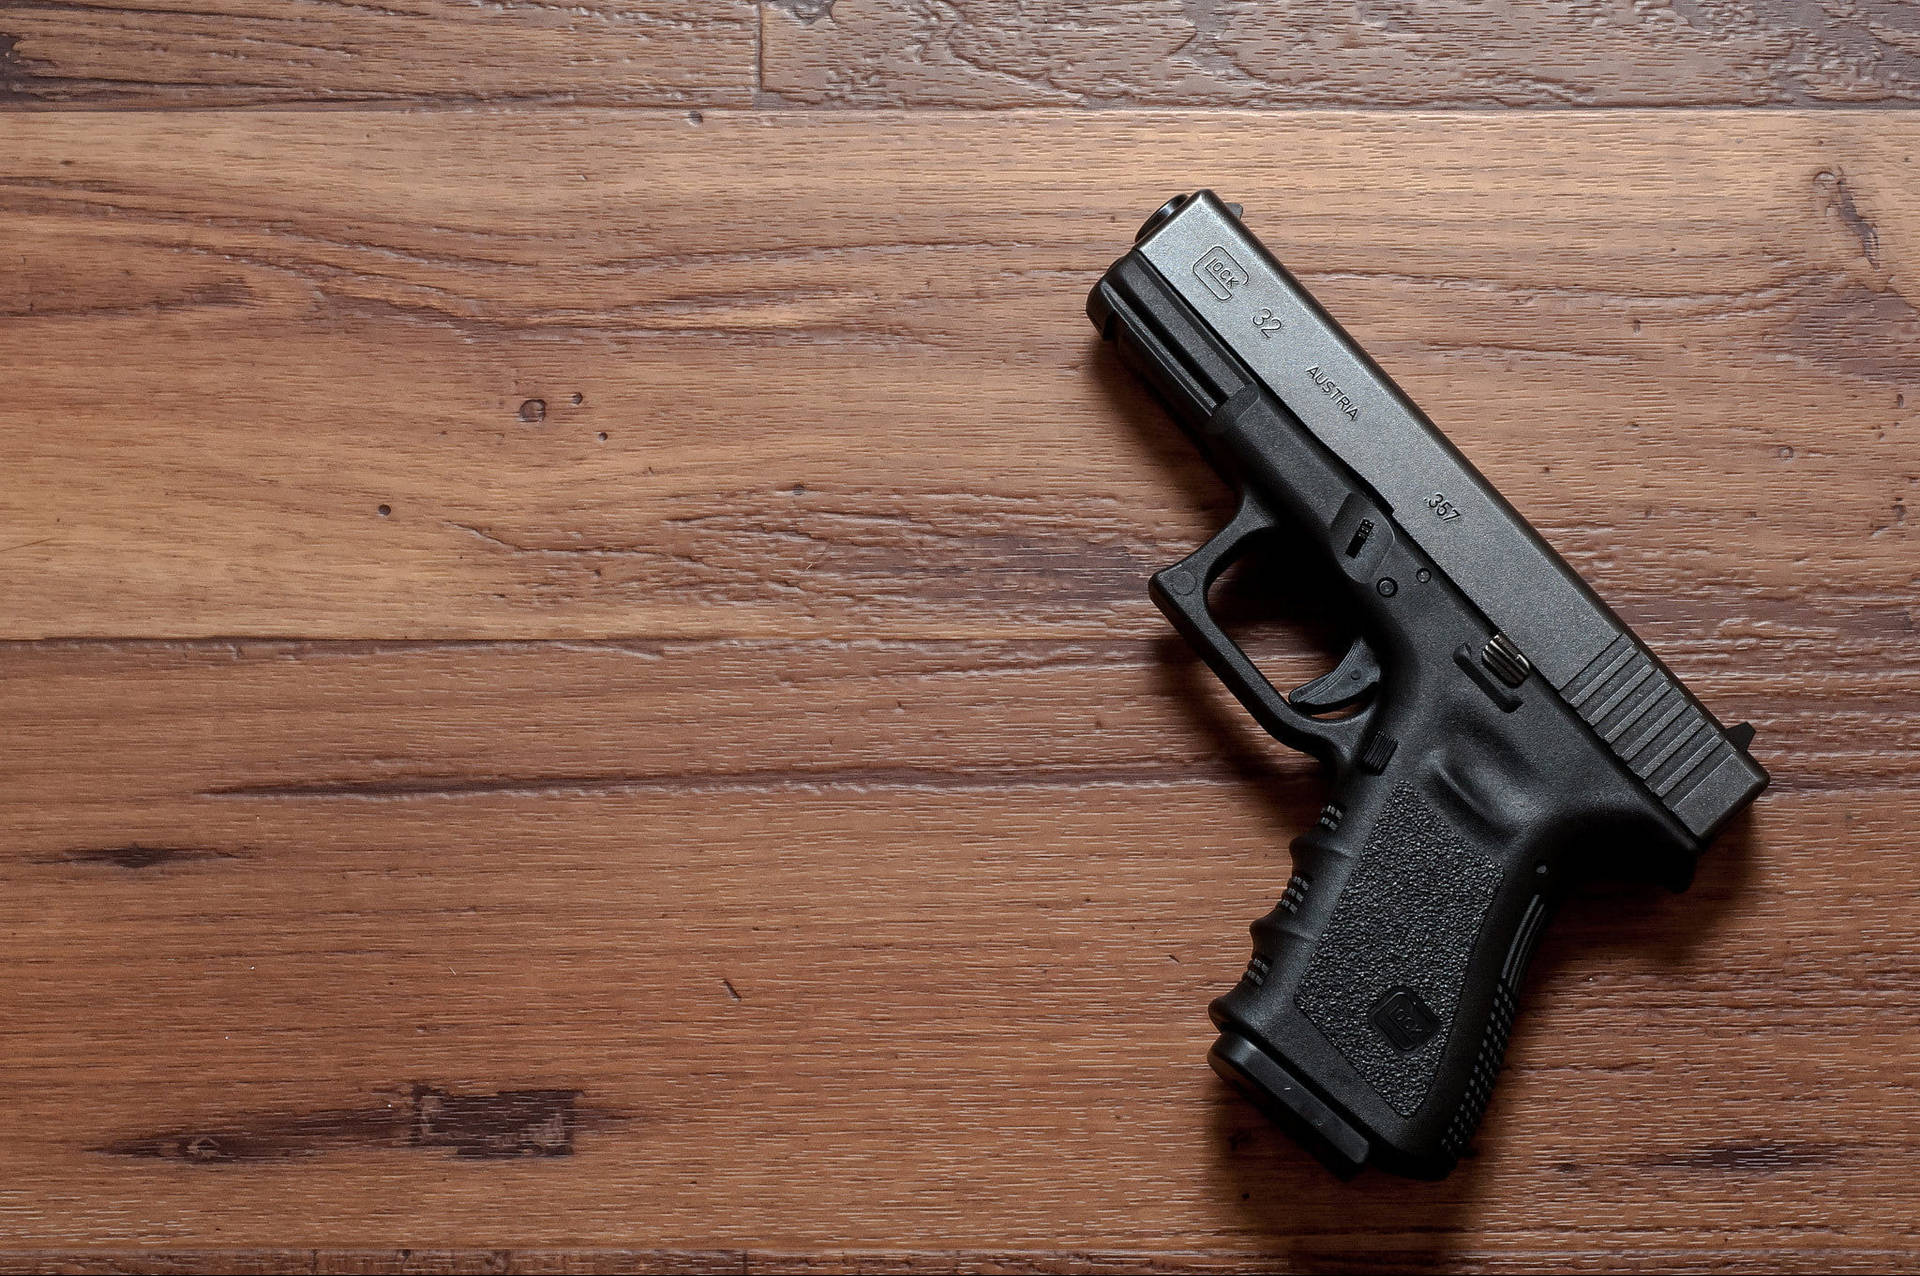 Glock 32 On Wooden Table Background